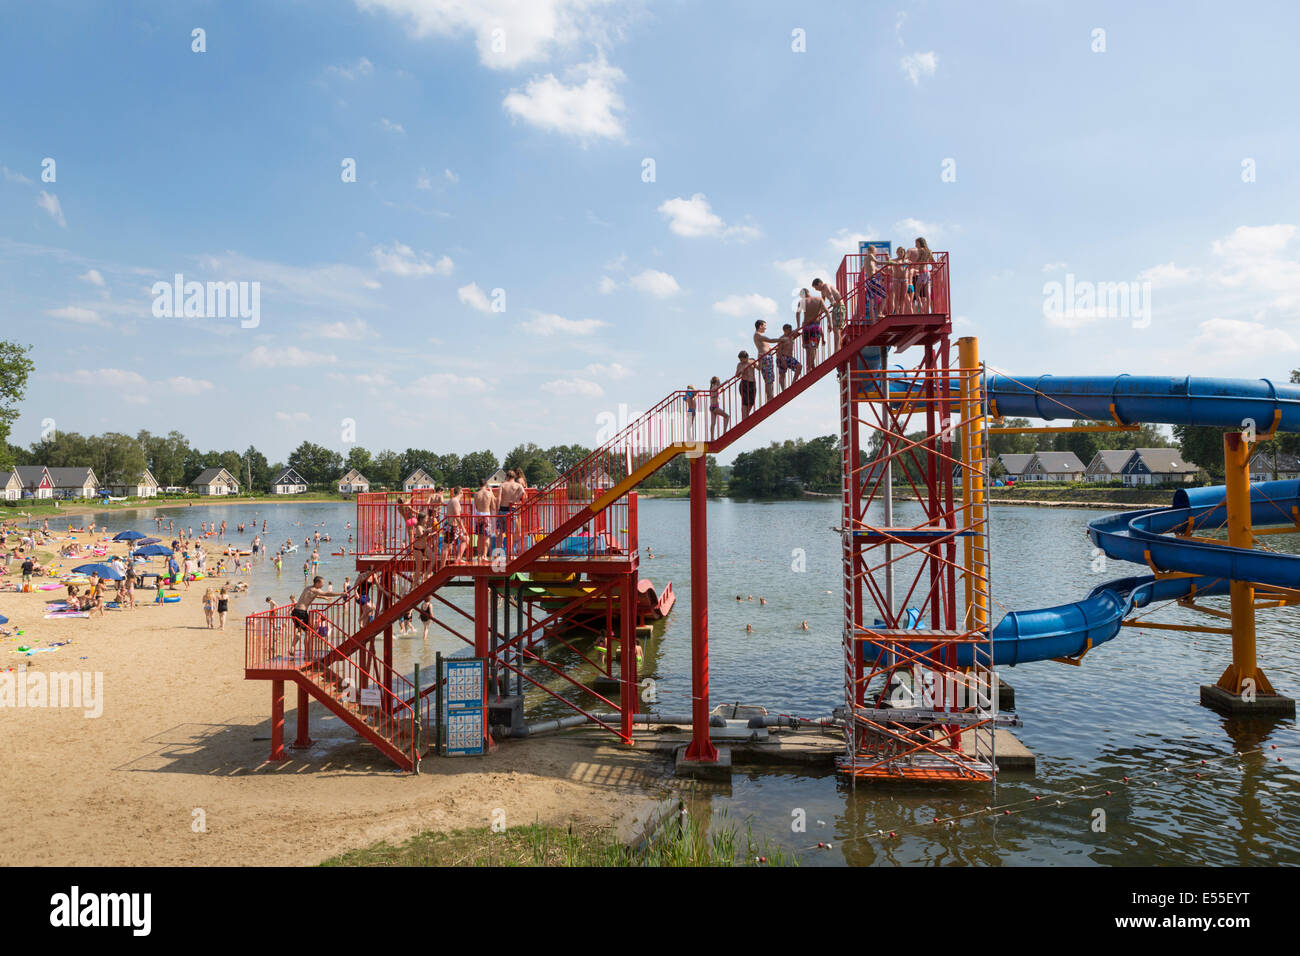 Lake with slide and swimming people in the Netherlands Stock Photo